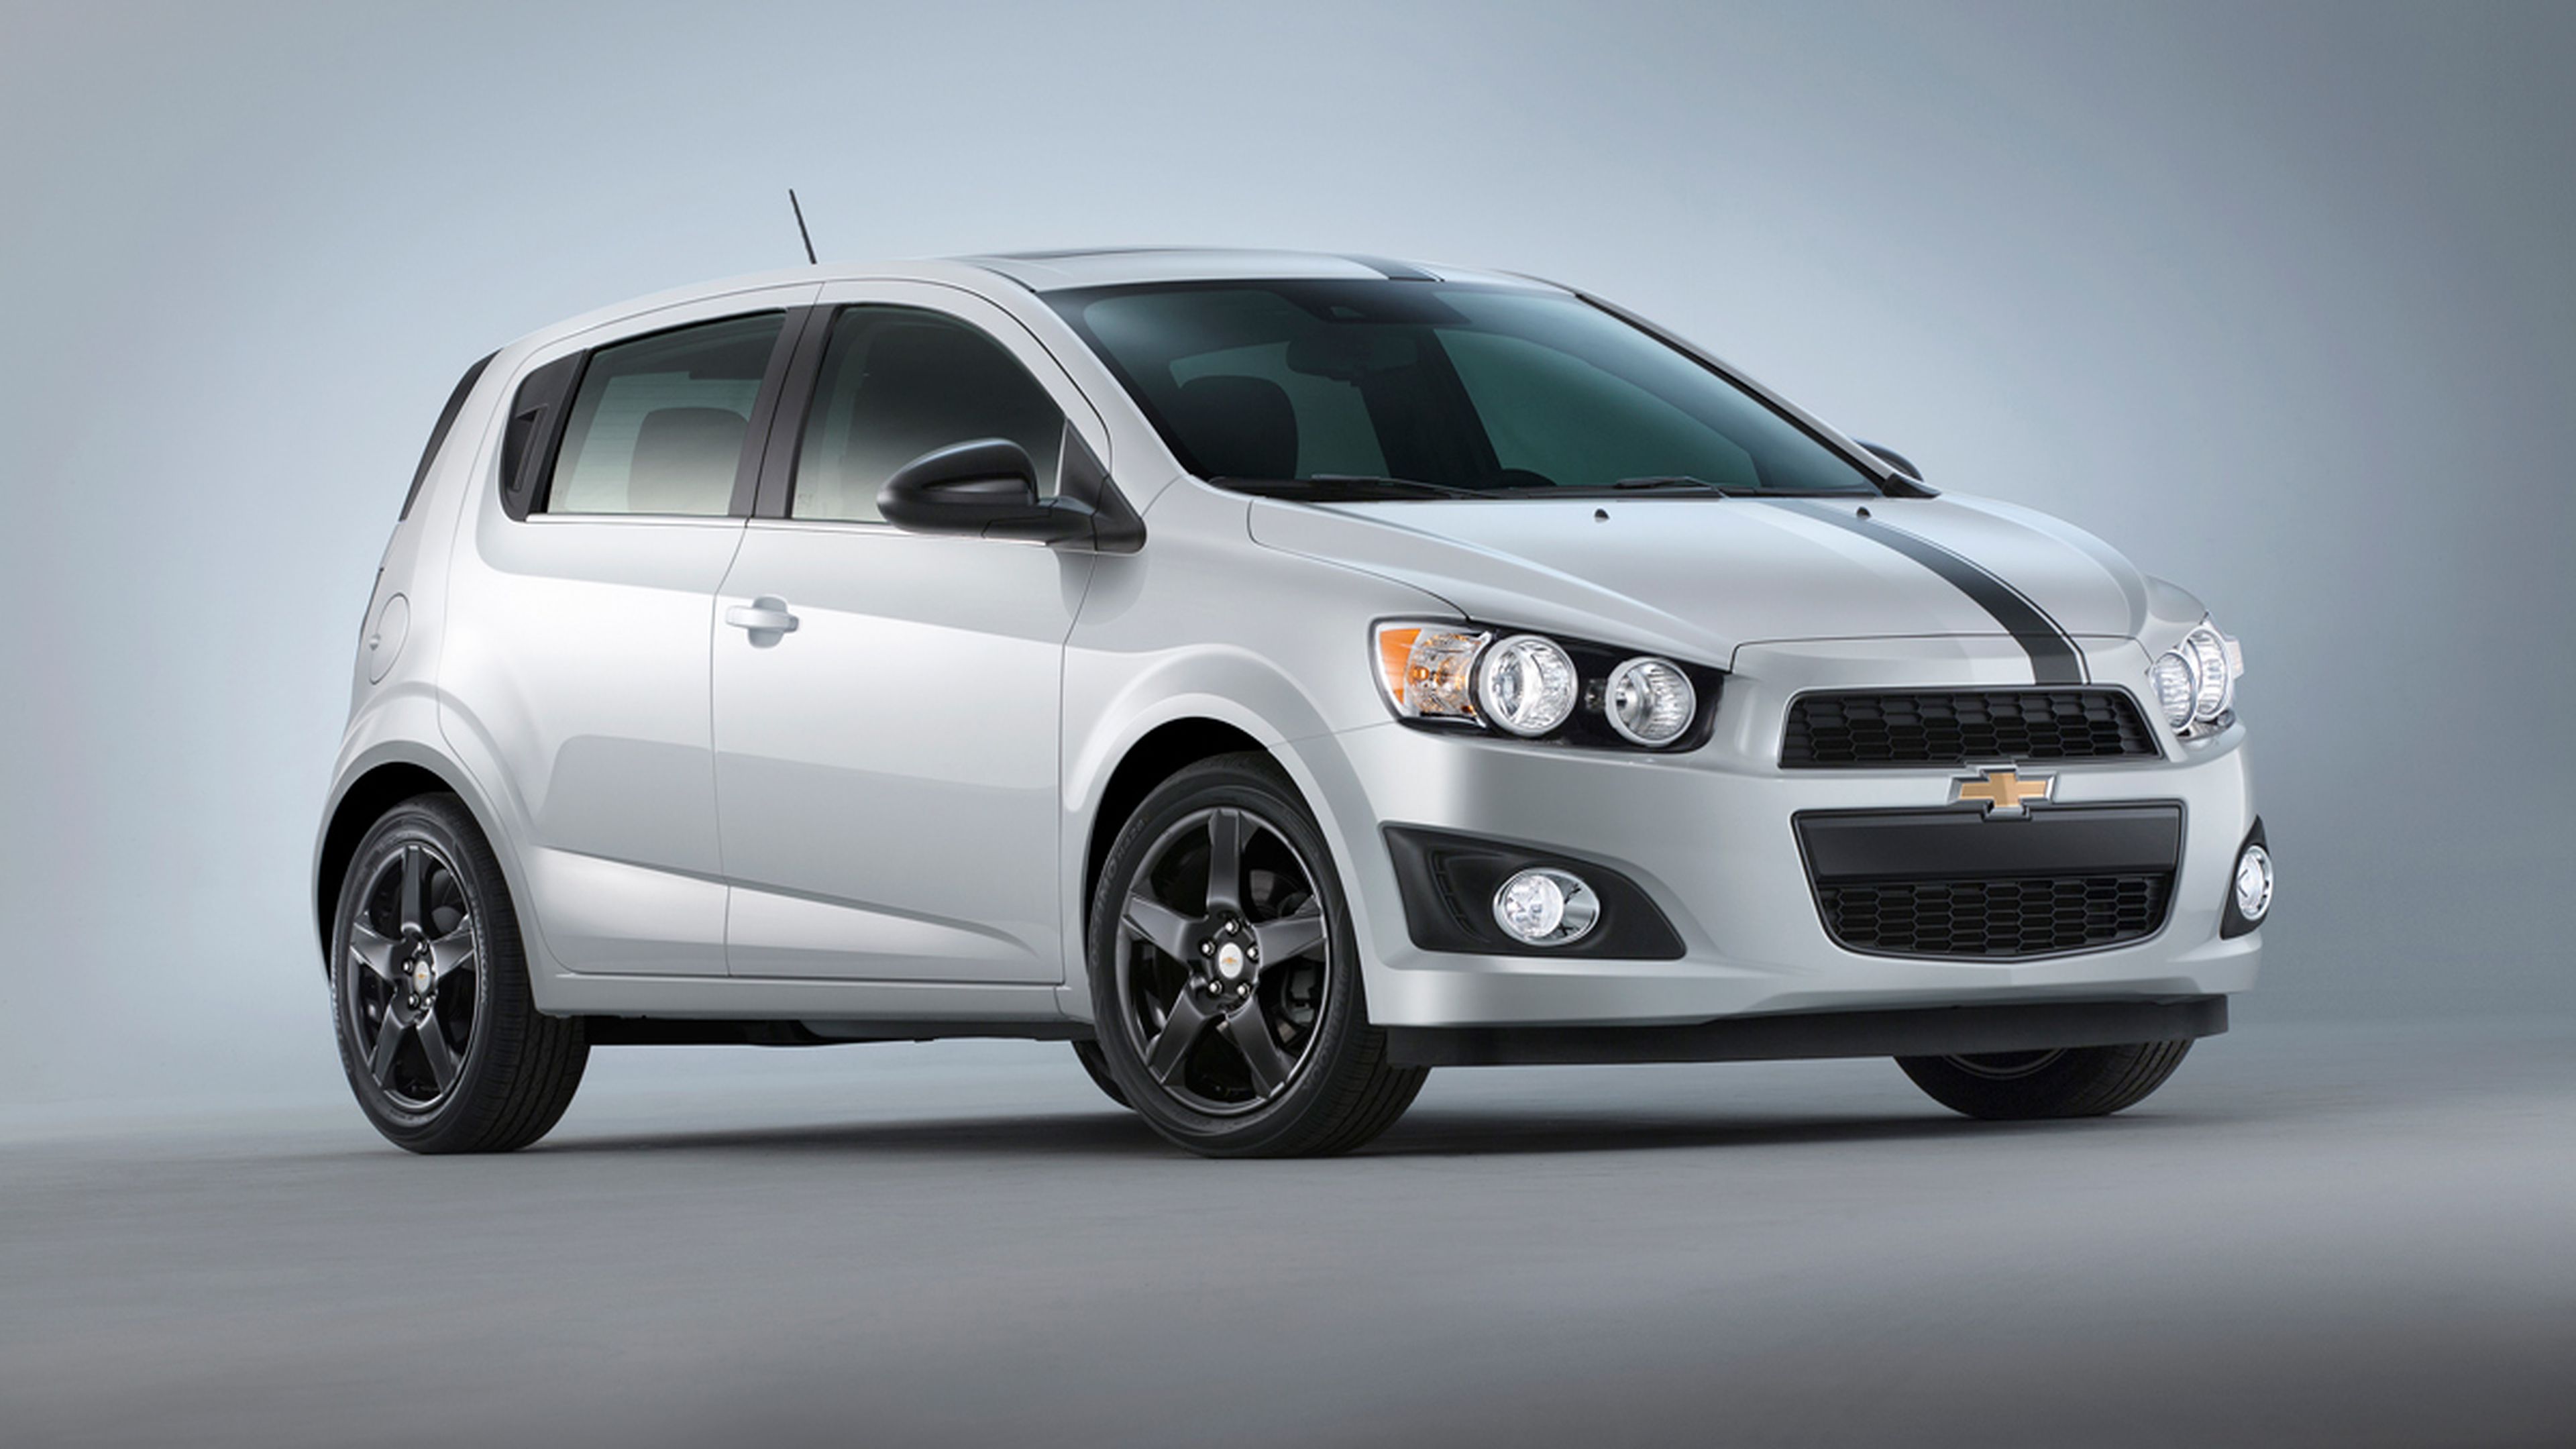 Chevrolet Socnic Accesories Concept - frontal